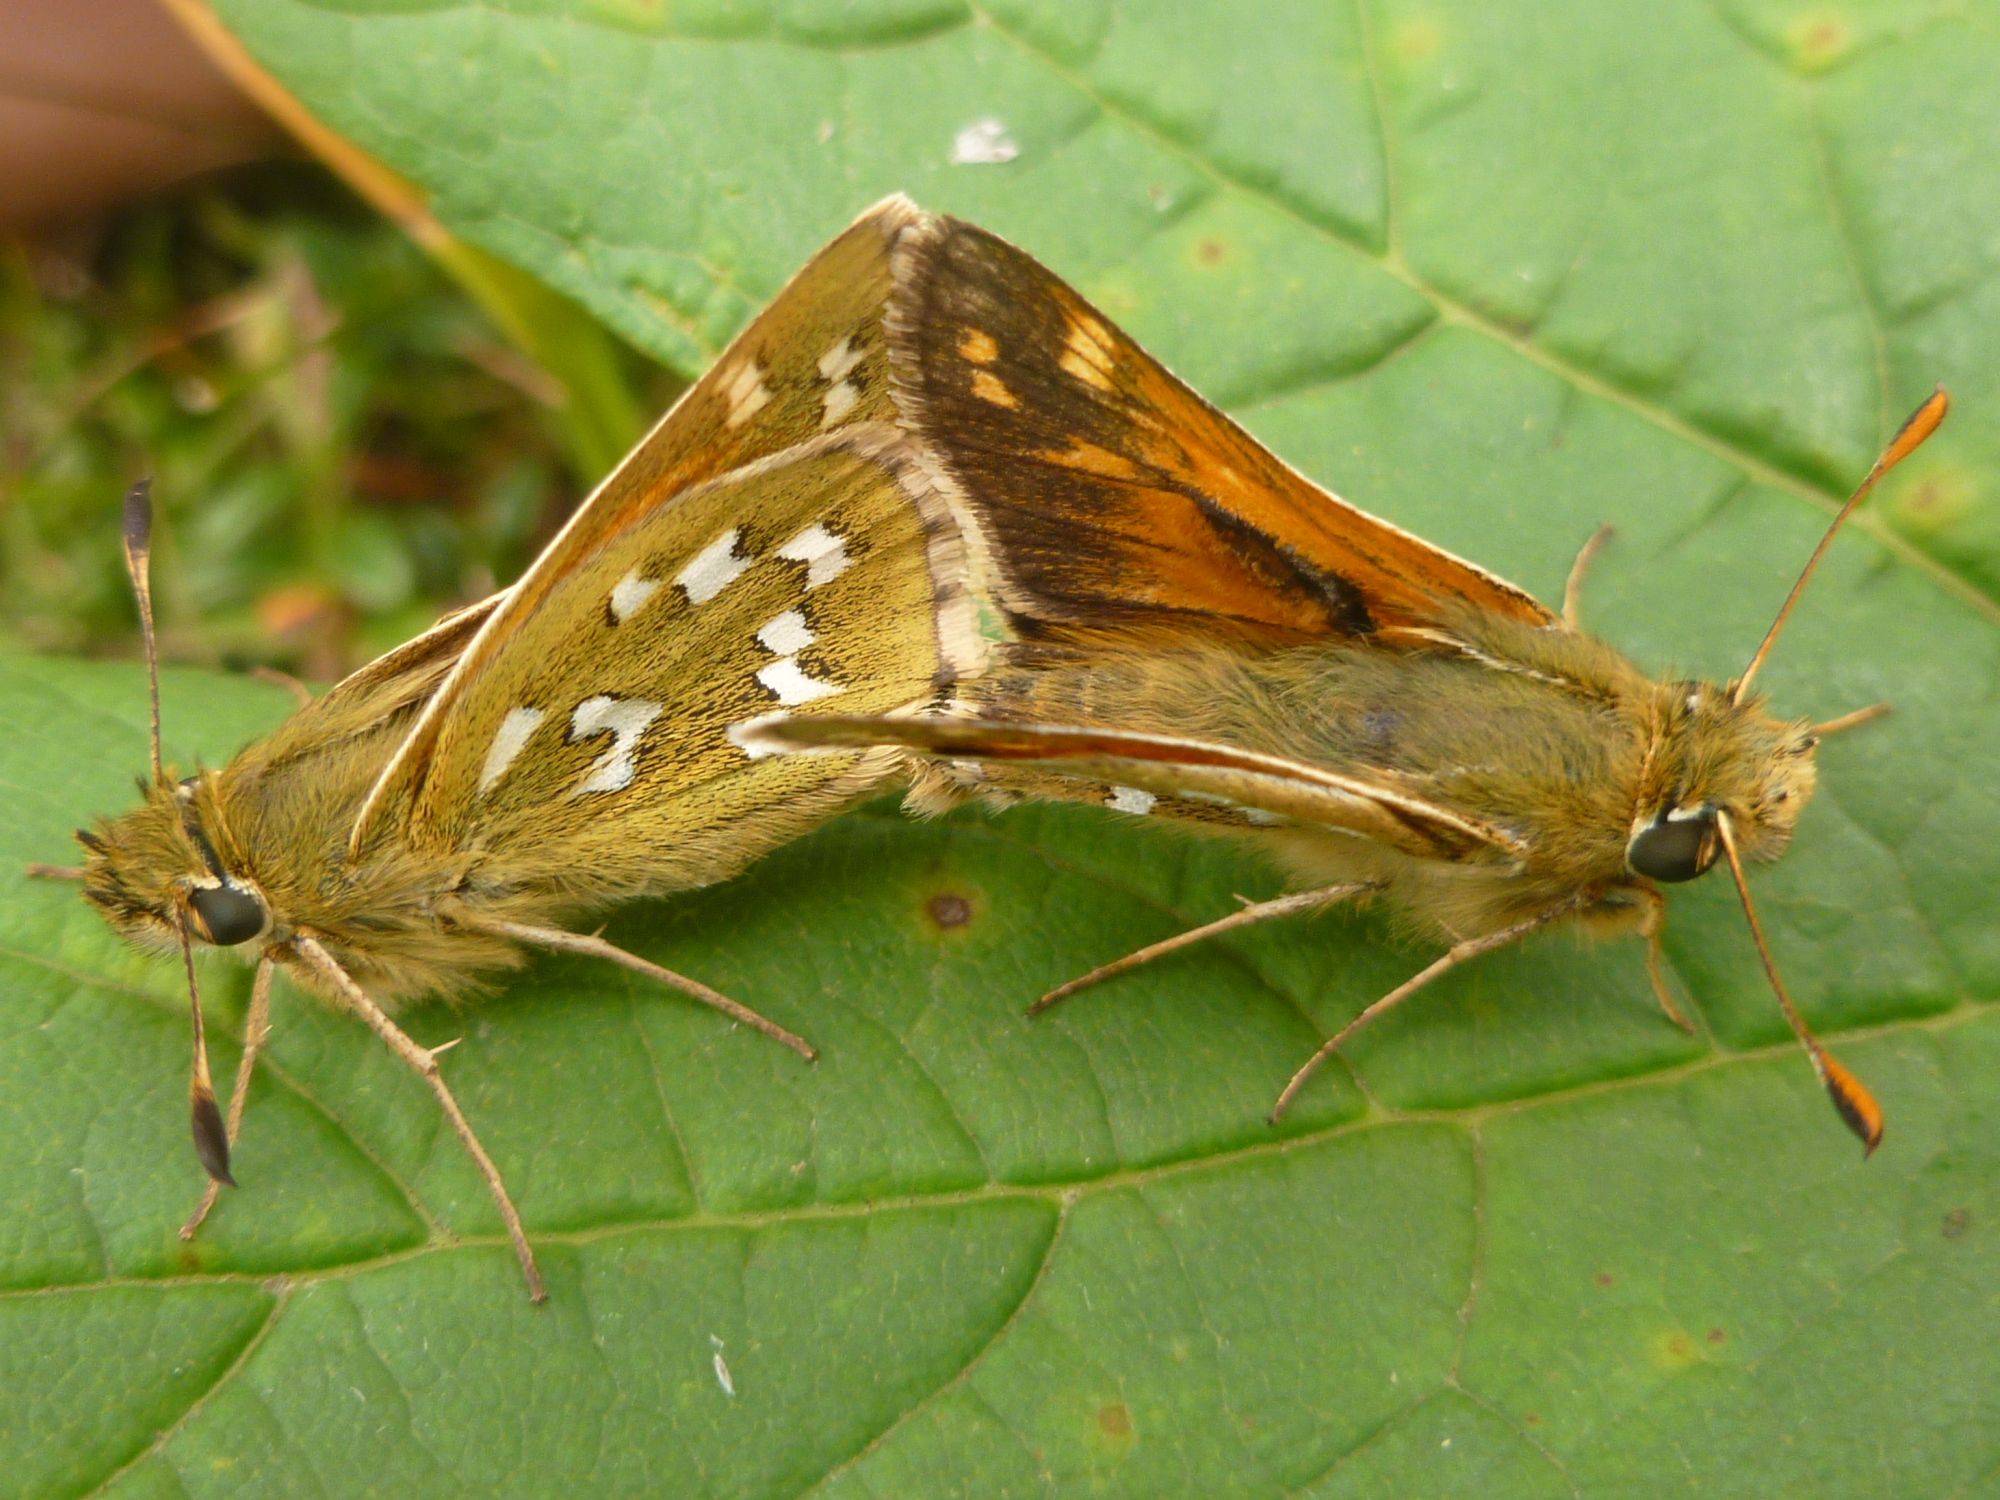 Two Silver-spotted skippers back to back, their abdomens connected, presumably for reproduction